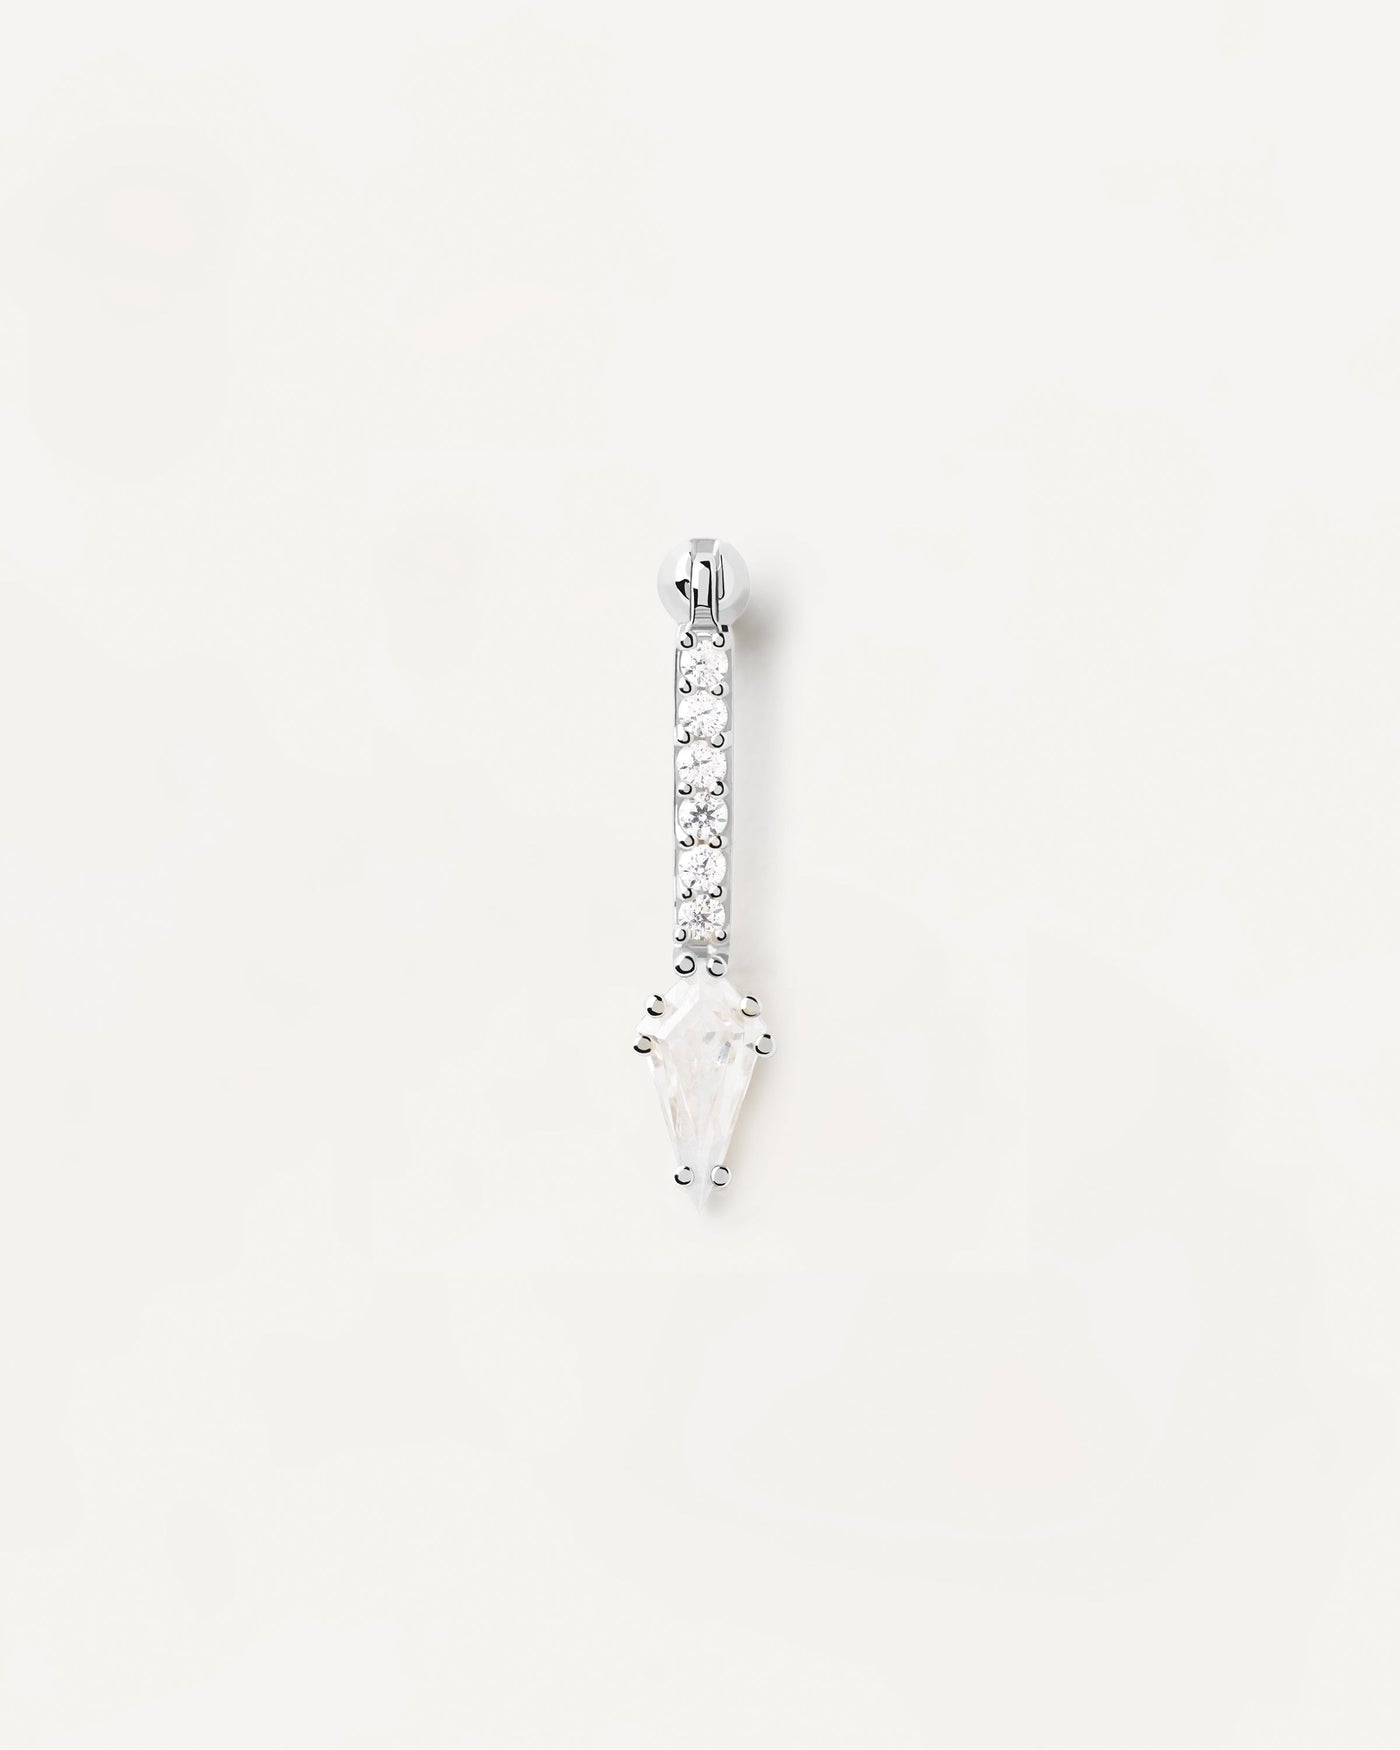 2023 Selection | Super Vero Single Silver Earring. Sterling silver ear piercing with dainty zirconia and big crystal drop. Get the latest arrival from PDPAOLA. Place your order safely and get this Best Seller. Free Shipping.